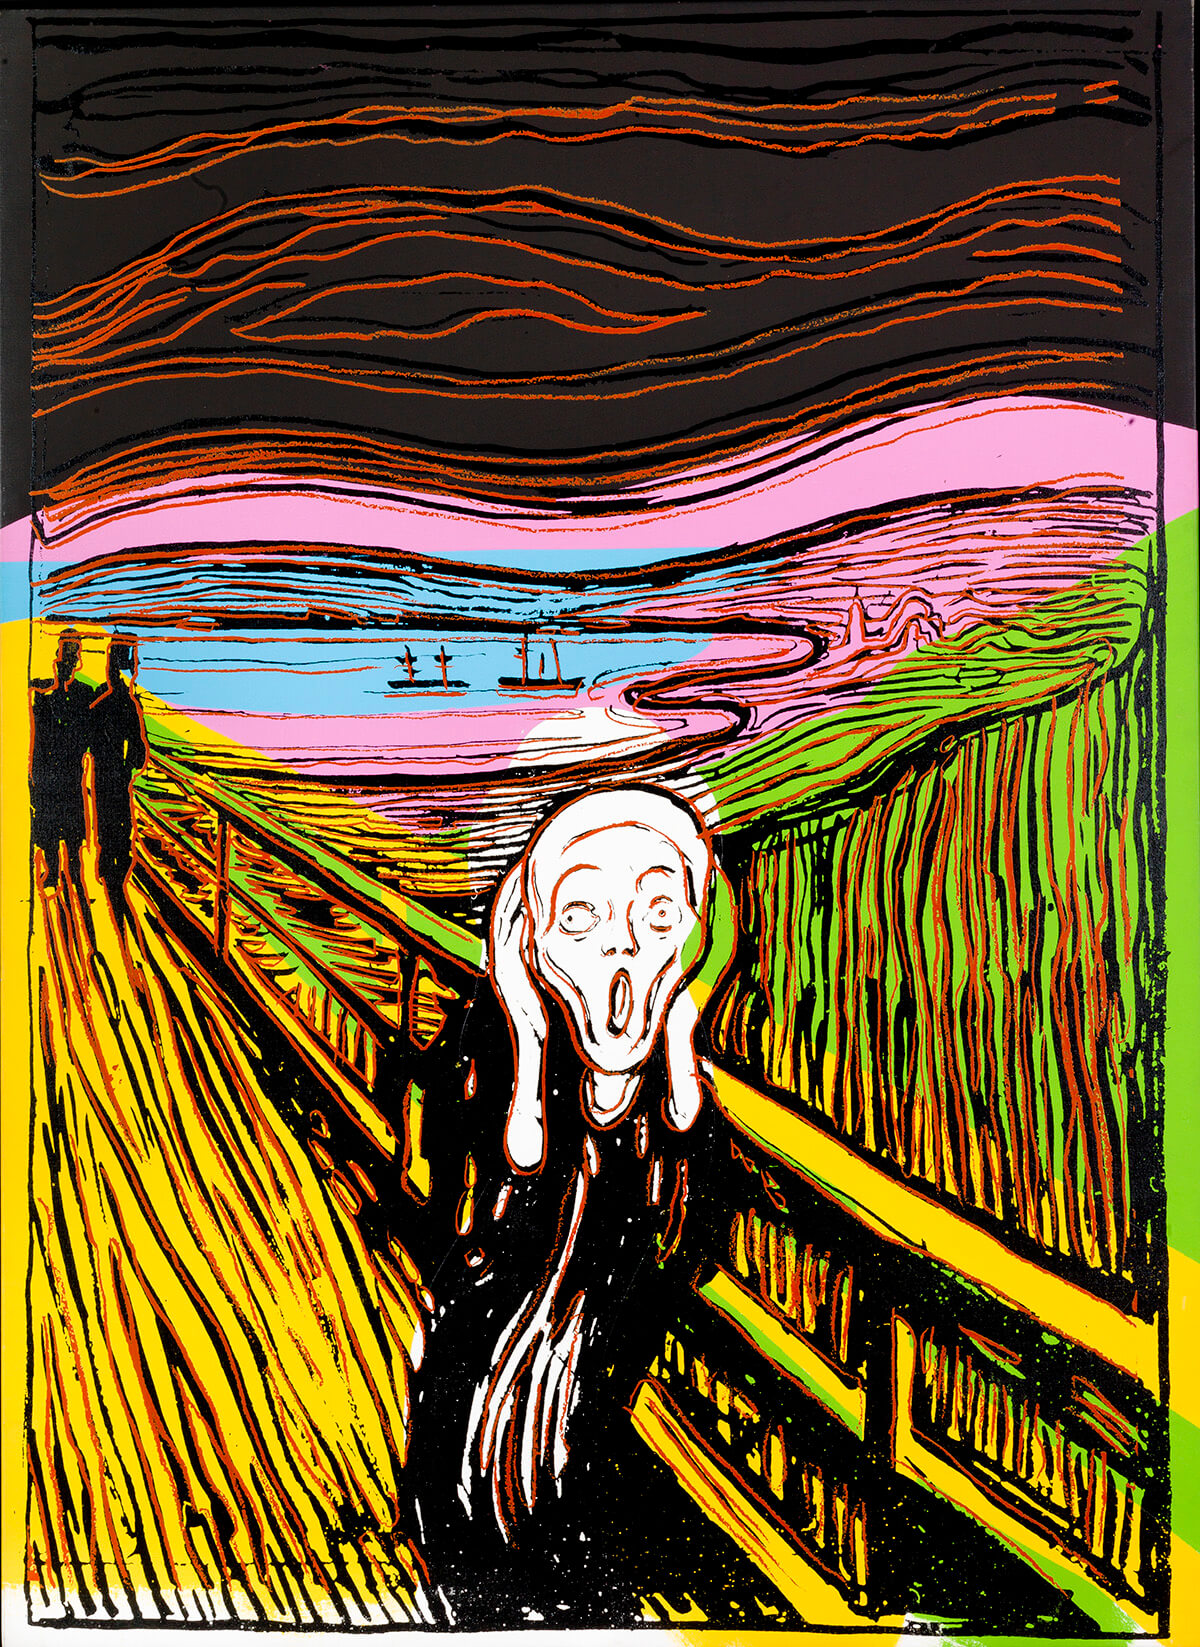 Andy Warhol's colourful print interpretation of the iconic painting by Edward Munch, The Scream